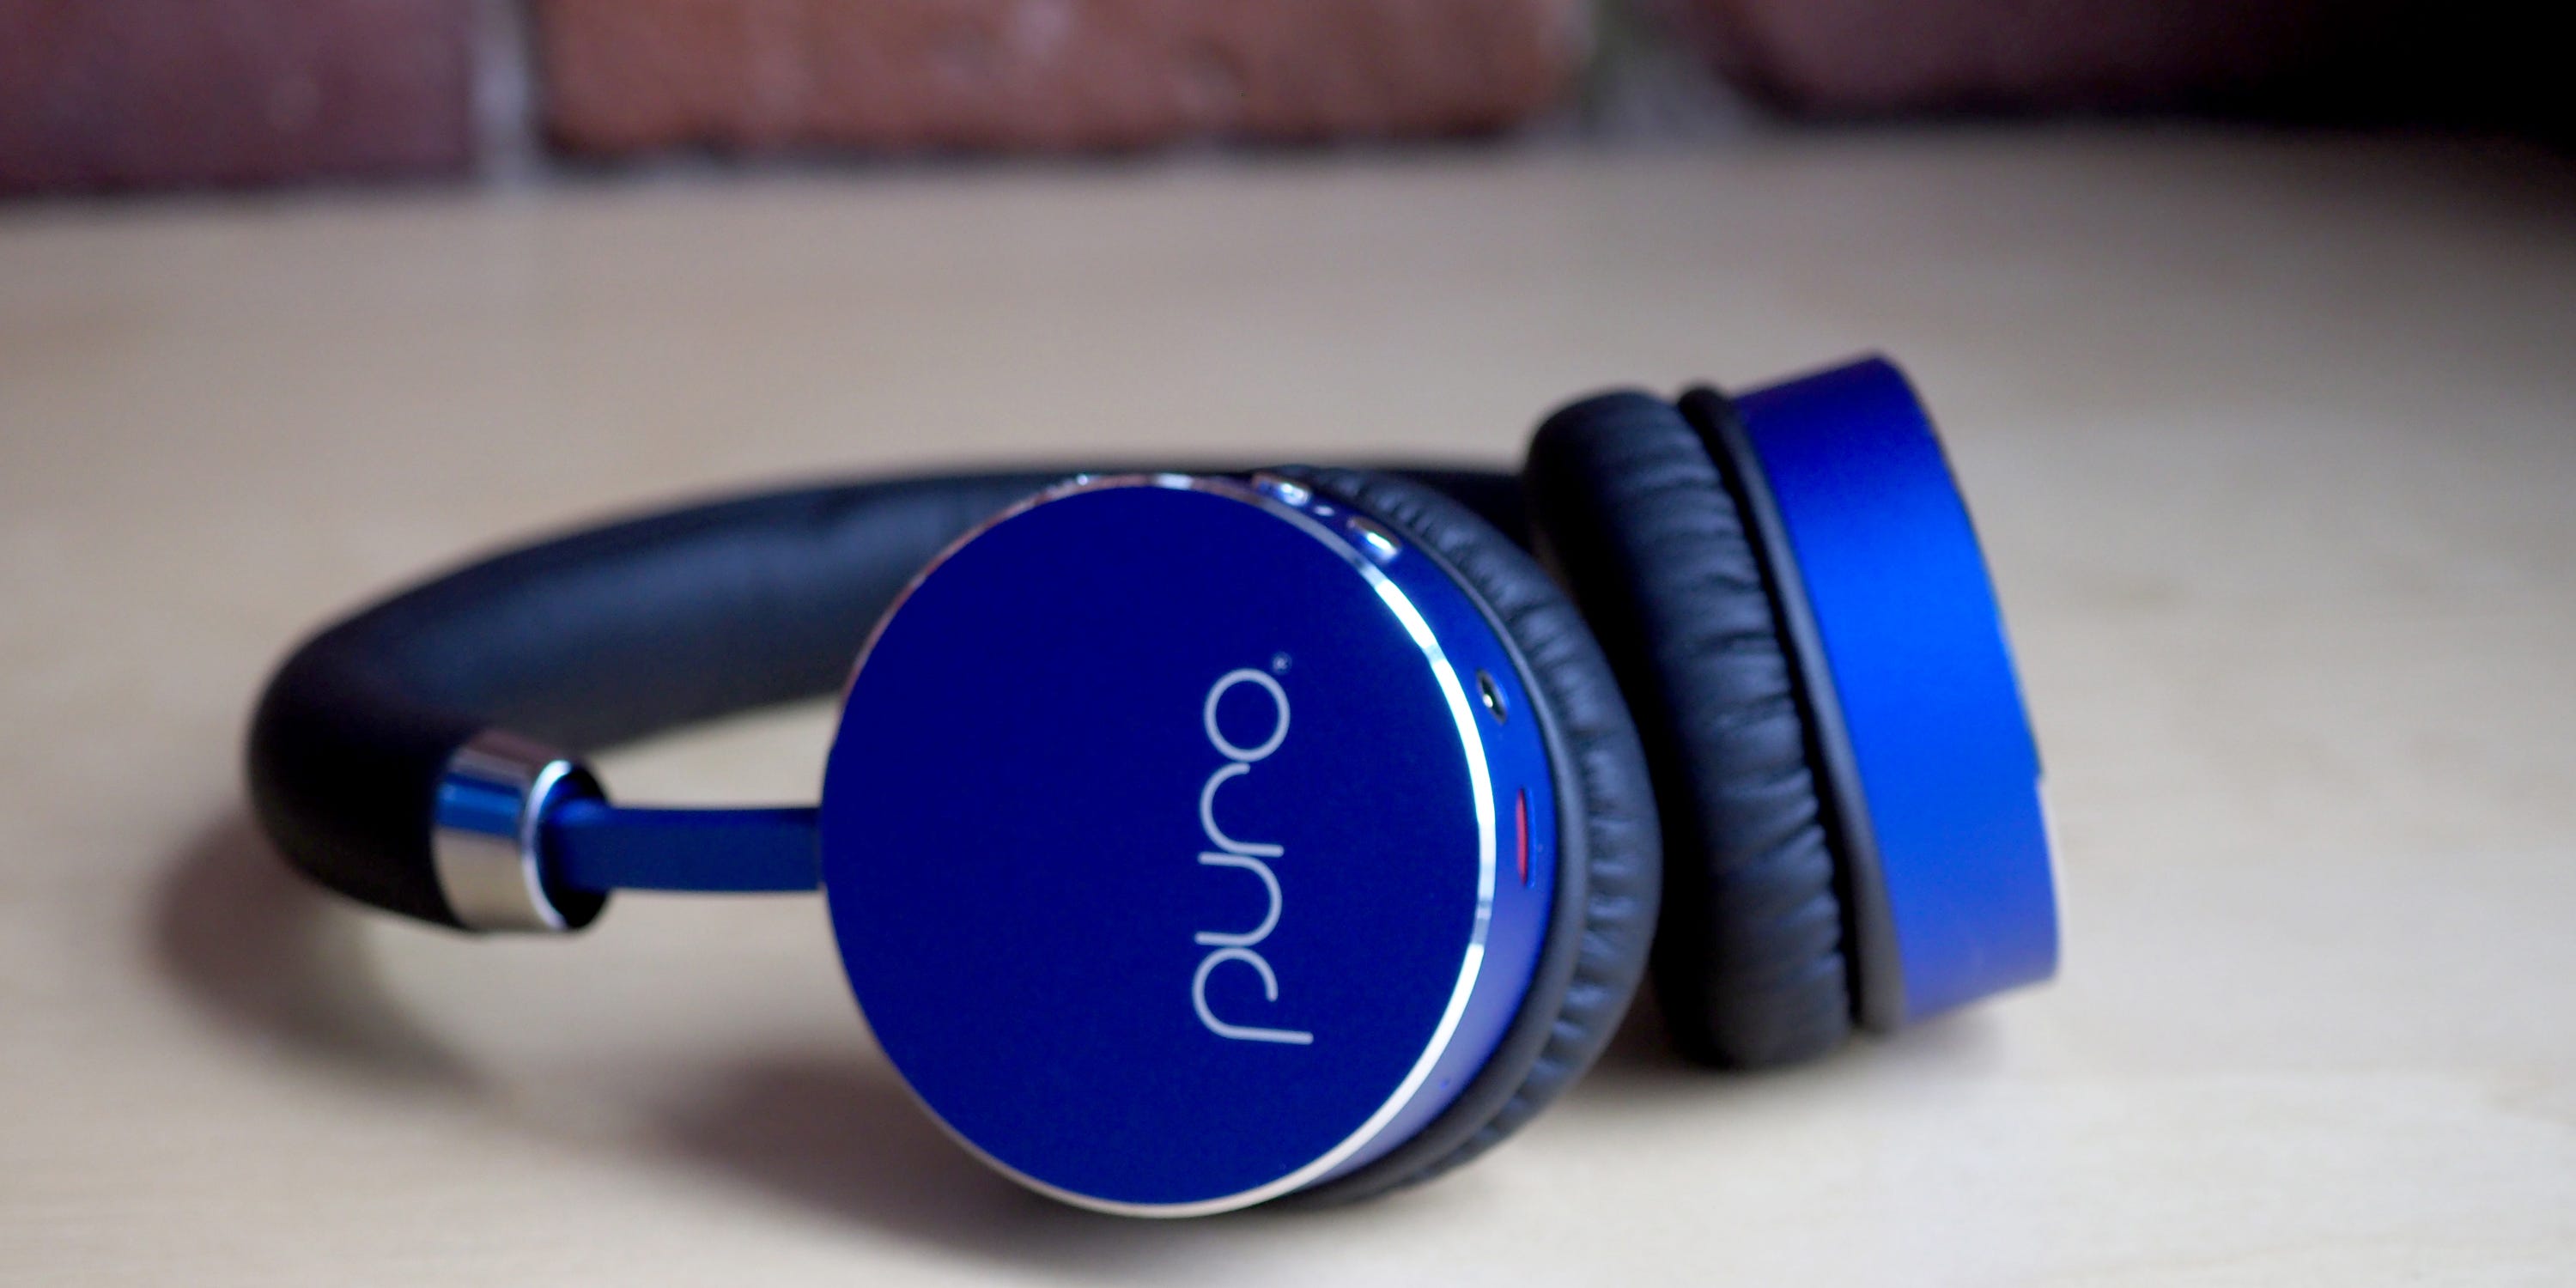 Puro's top-tested kids' headphones are on sale right now